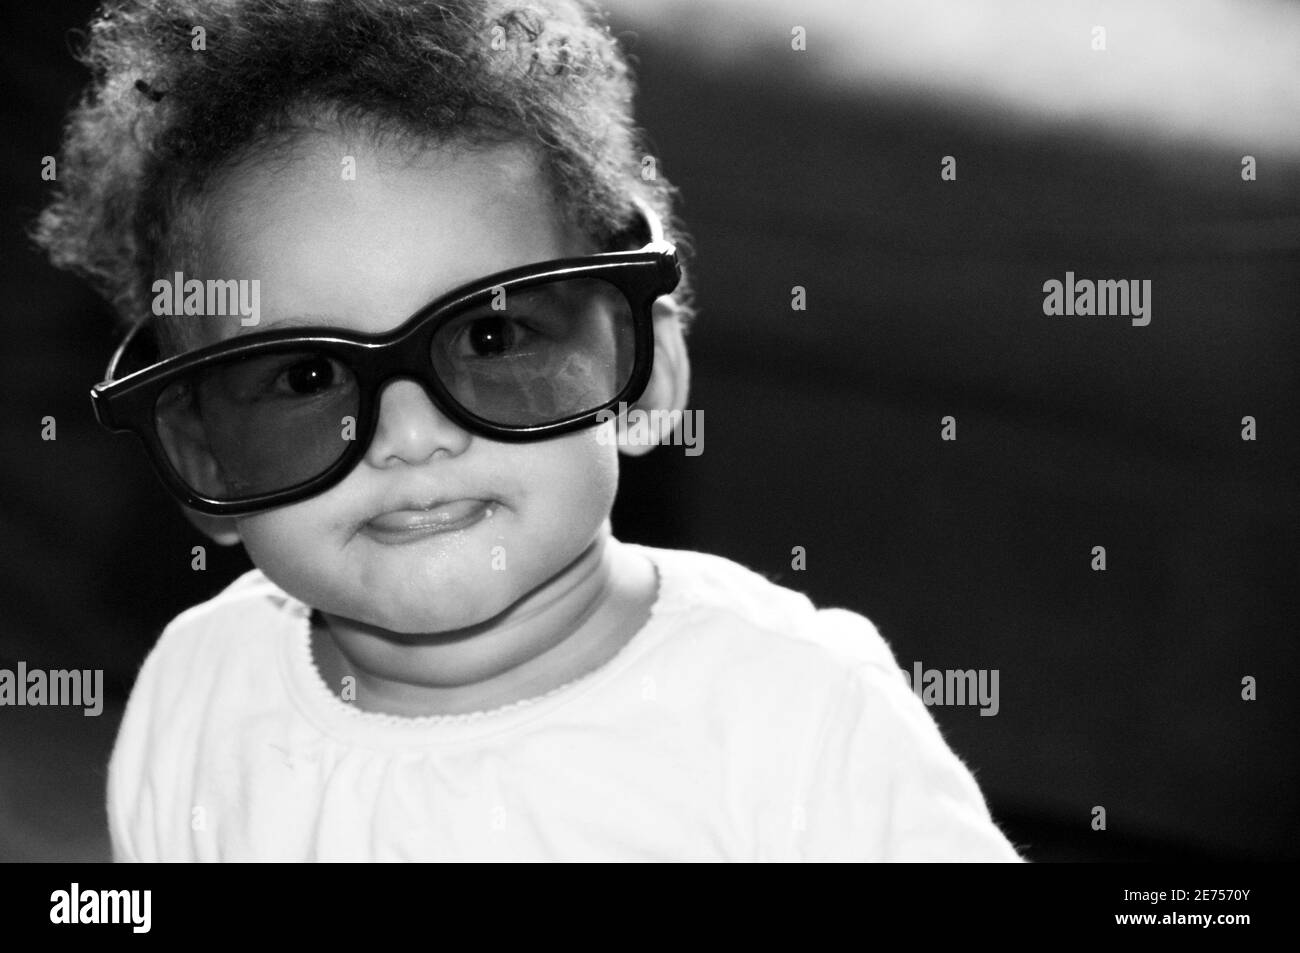 candid black and white portrait of baby wearing over sized glasses Stock Photo